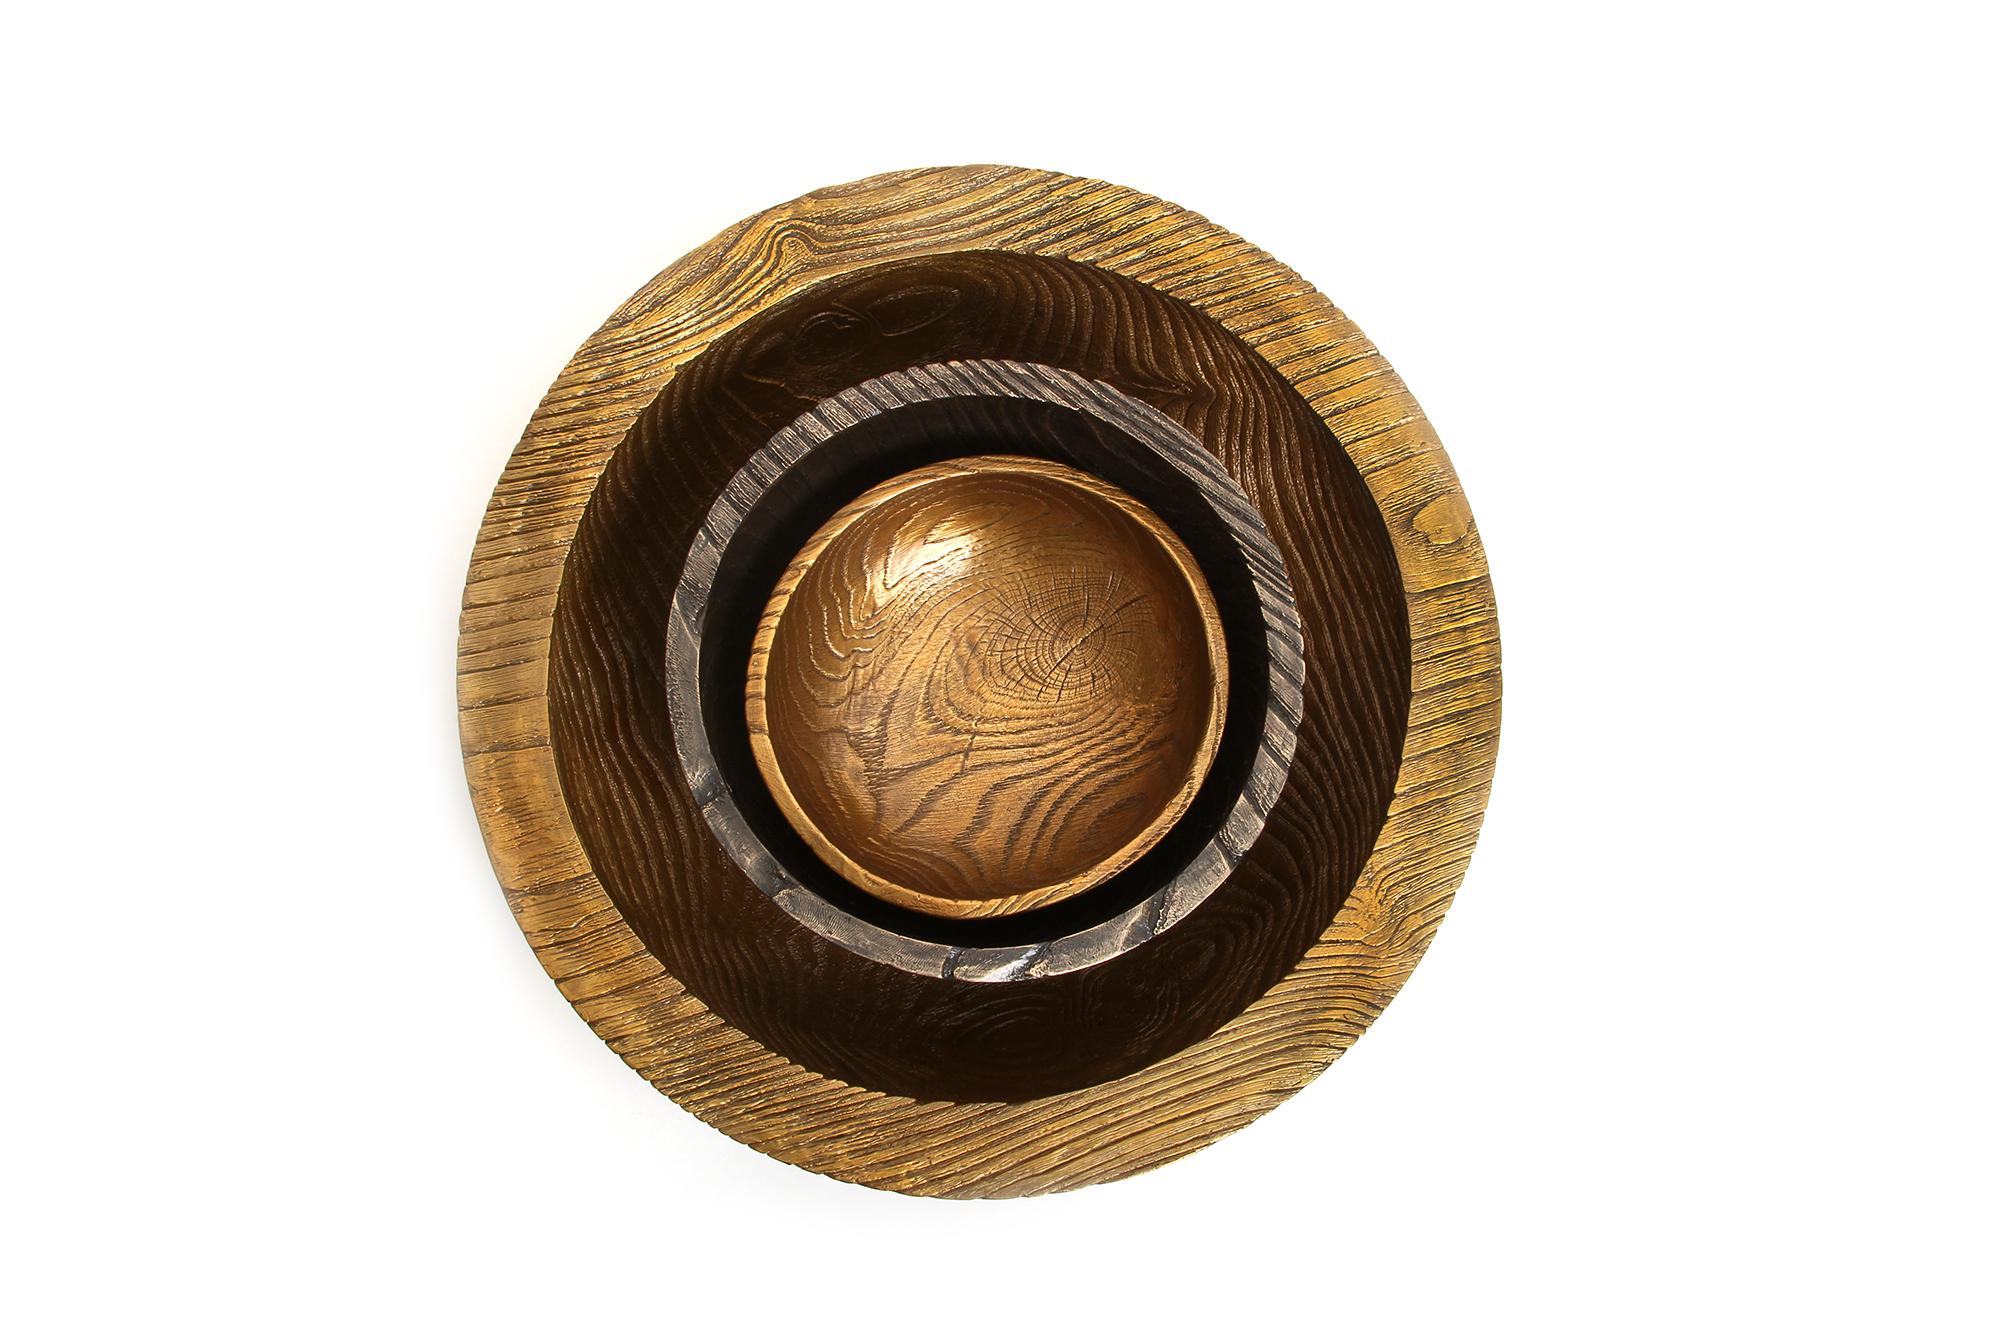 American Solid Bronze Set ‘Everest’, ‘Alpine’ and ‘Flora’ Bowls with Wood Grain Texture For Sale